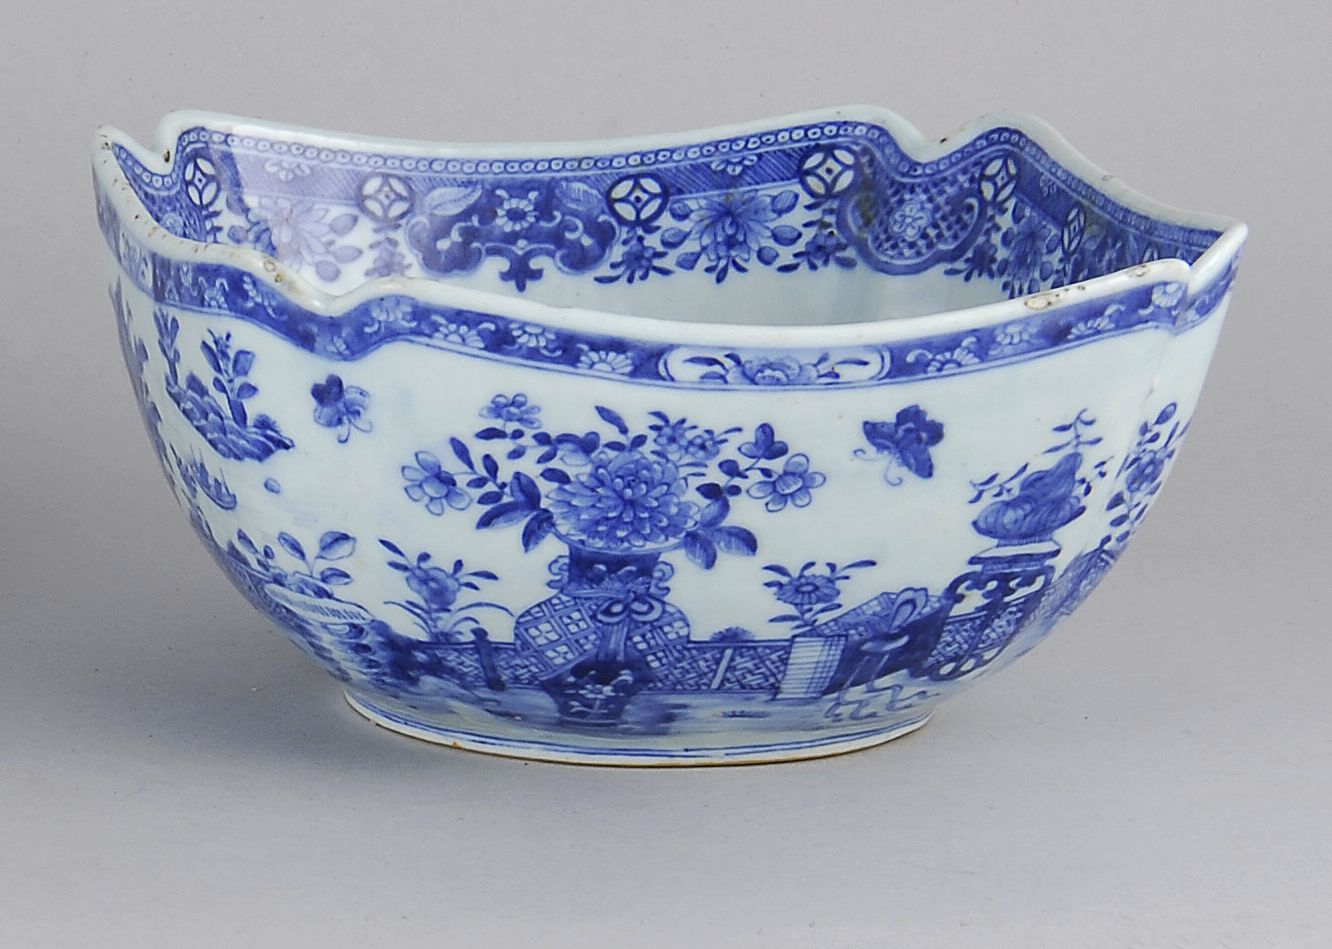 CHINESE EXPORT BLUE AND WHITE PORCELAIN